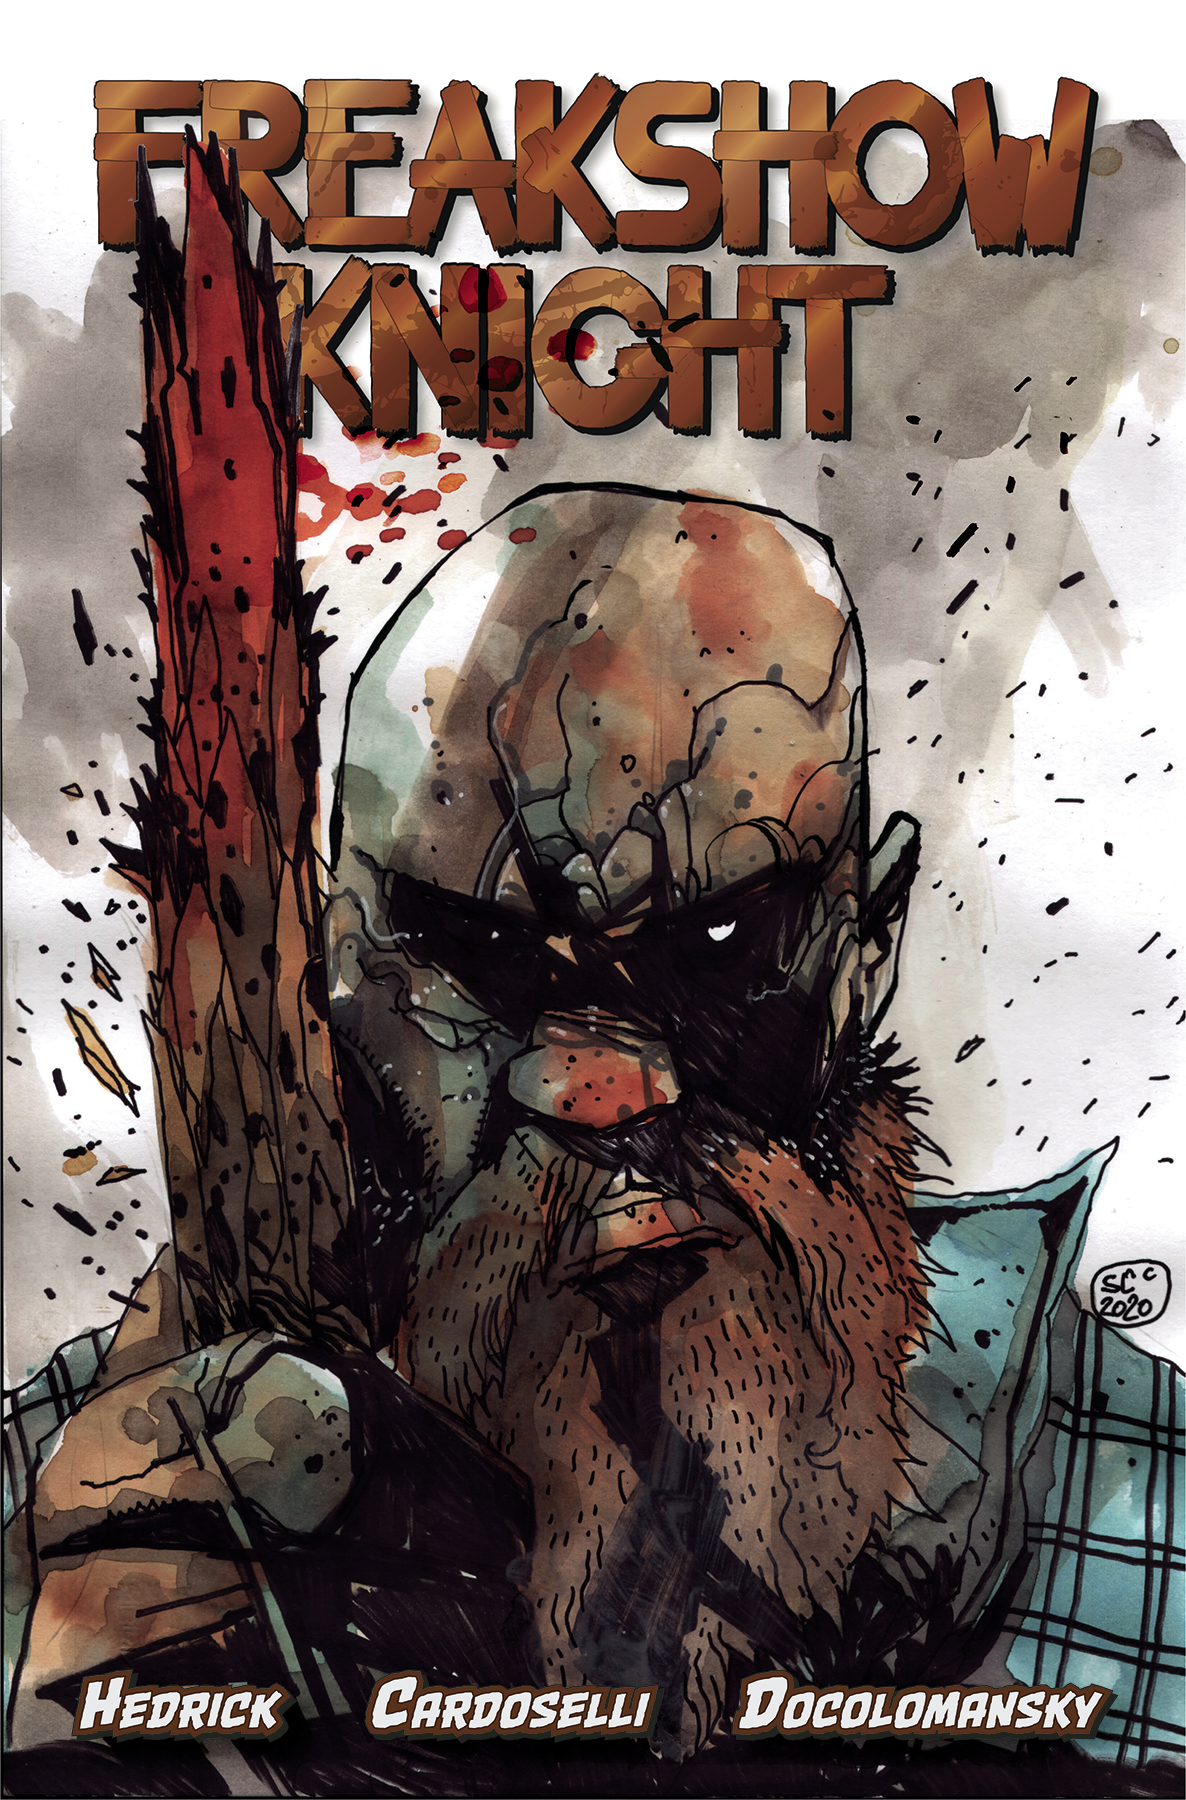 Freakshow Knight #1 Free 5 Copy Pirozzi Variant Incentive (Of 5)